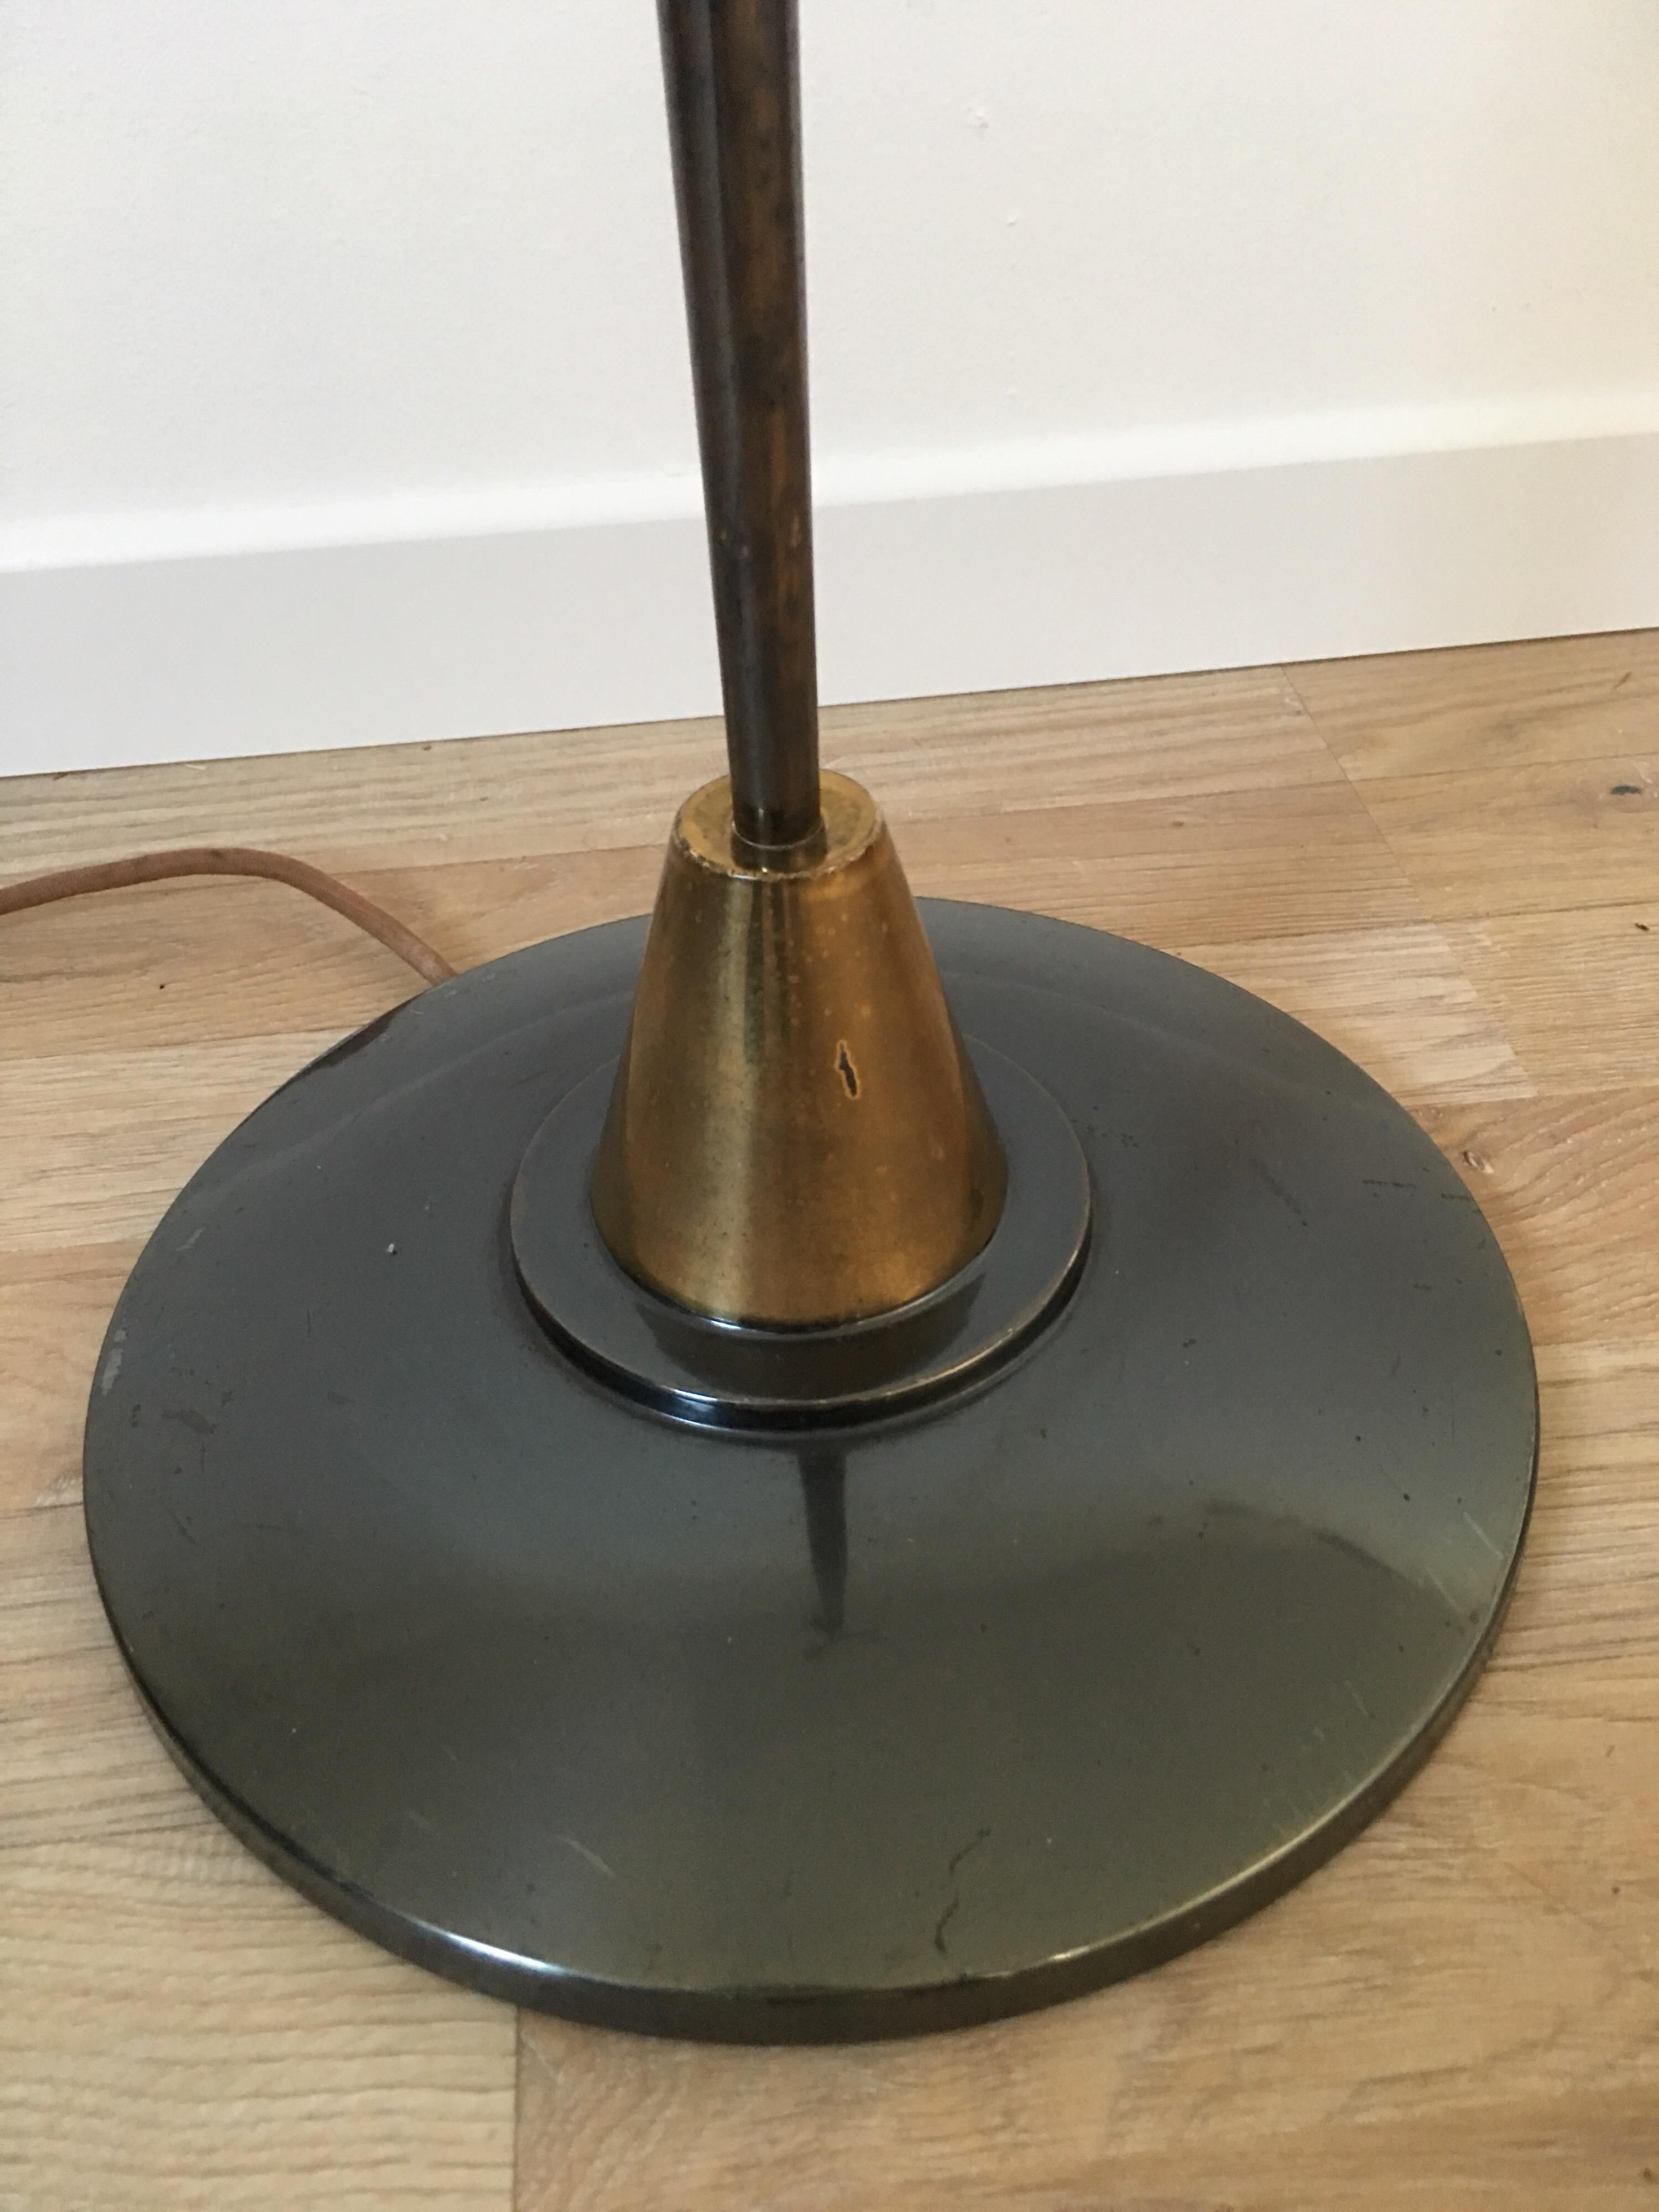 Maison Lunel Gun Metal and Gilt Bronze Patinas Metal Floor Lamp, French, 1950s For Sale 11